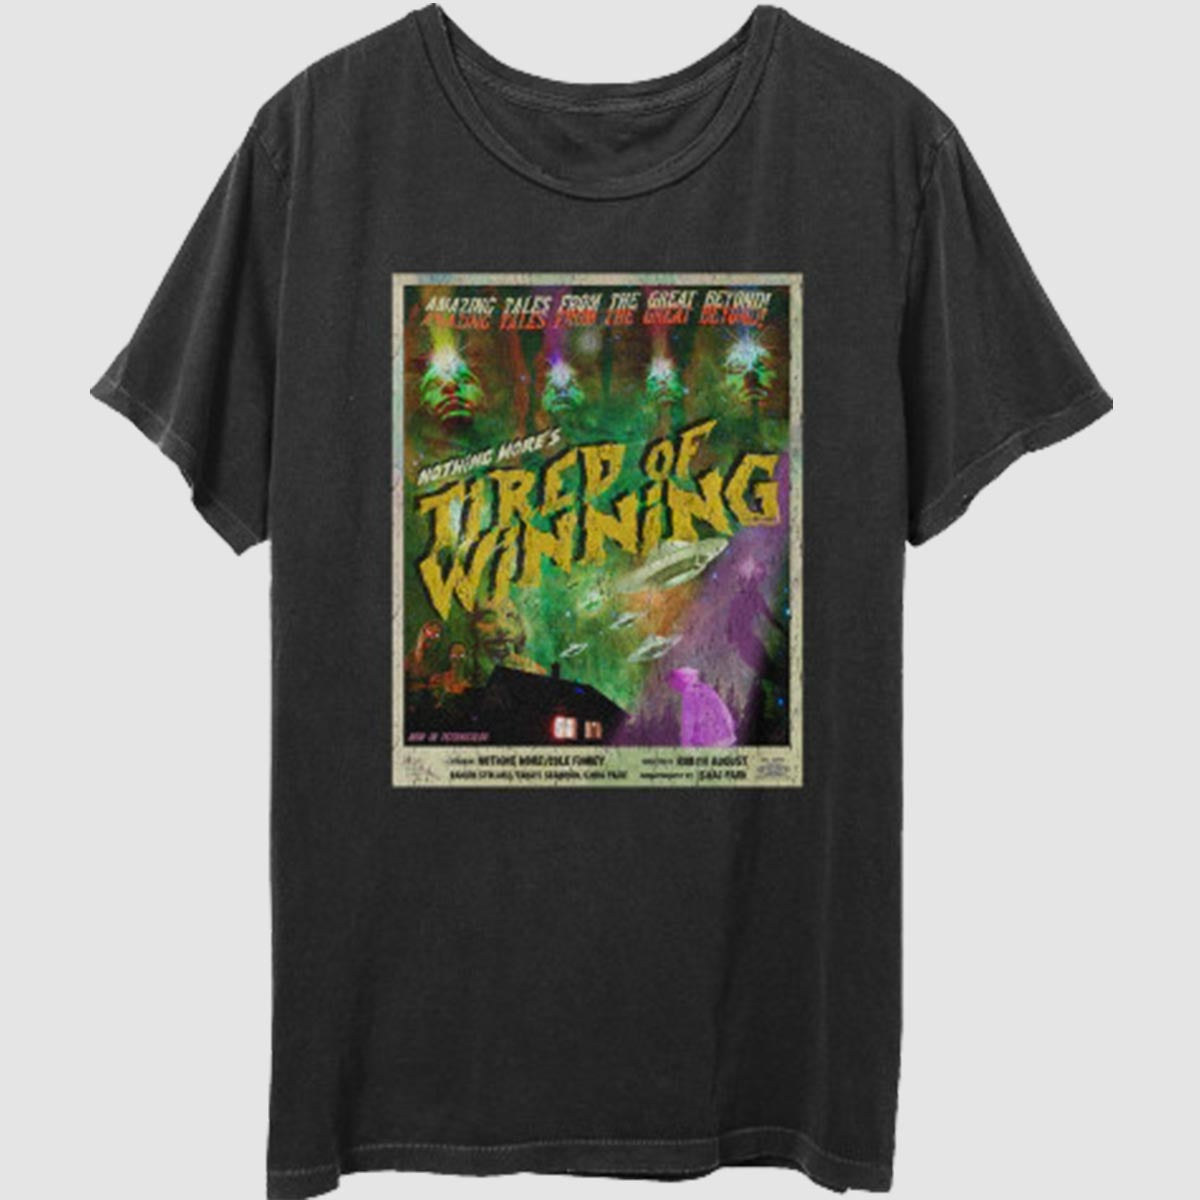 TIRED OF WINNING POSTER TEE